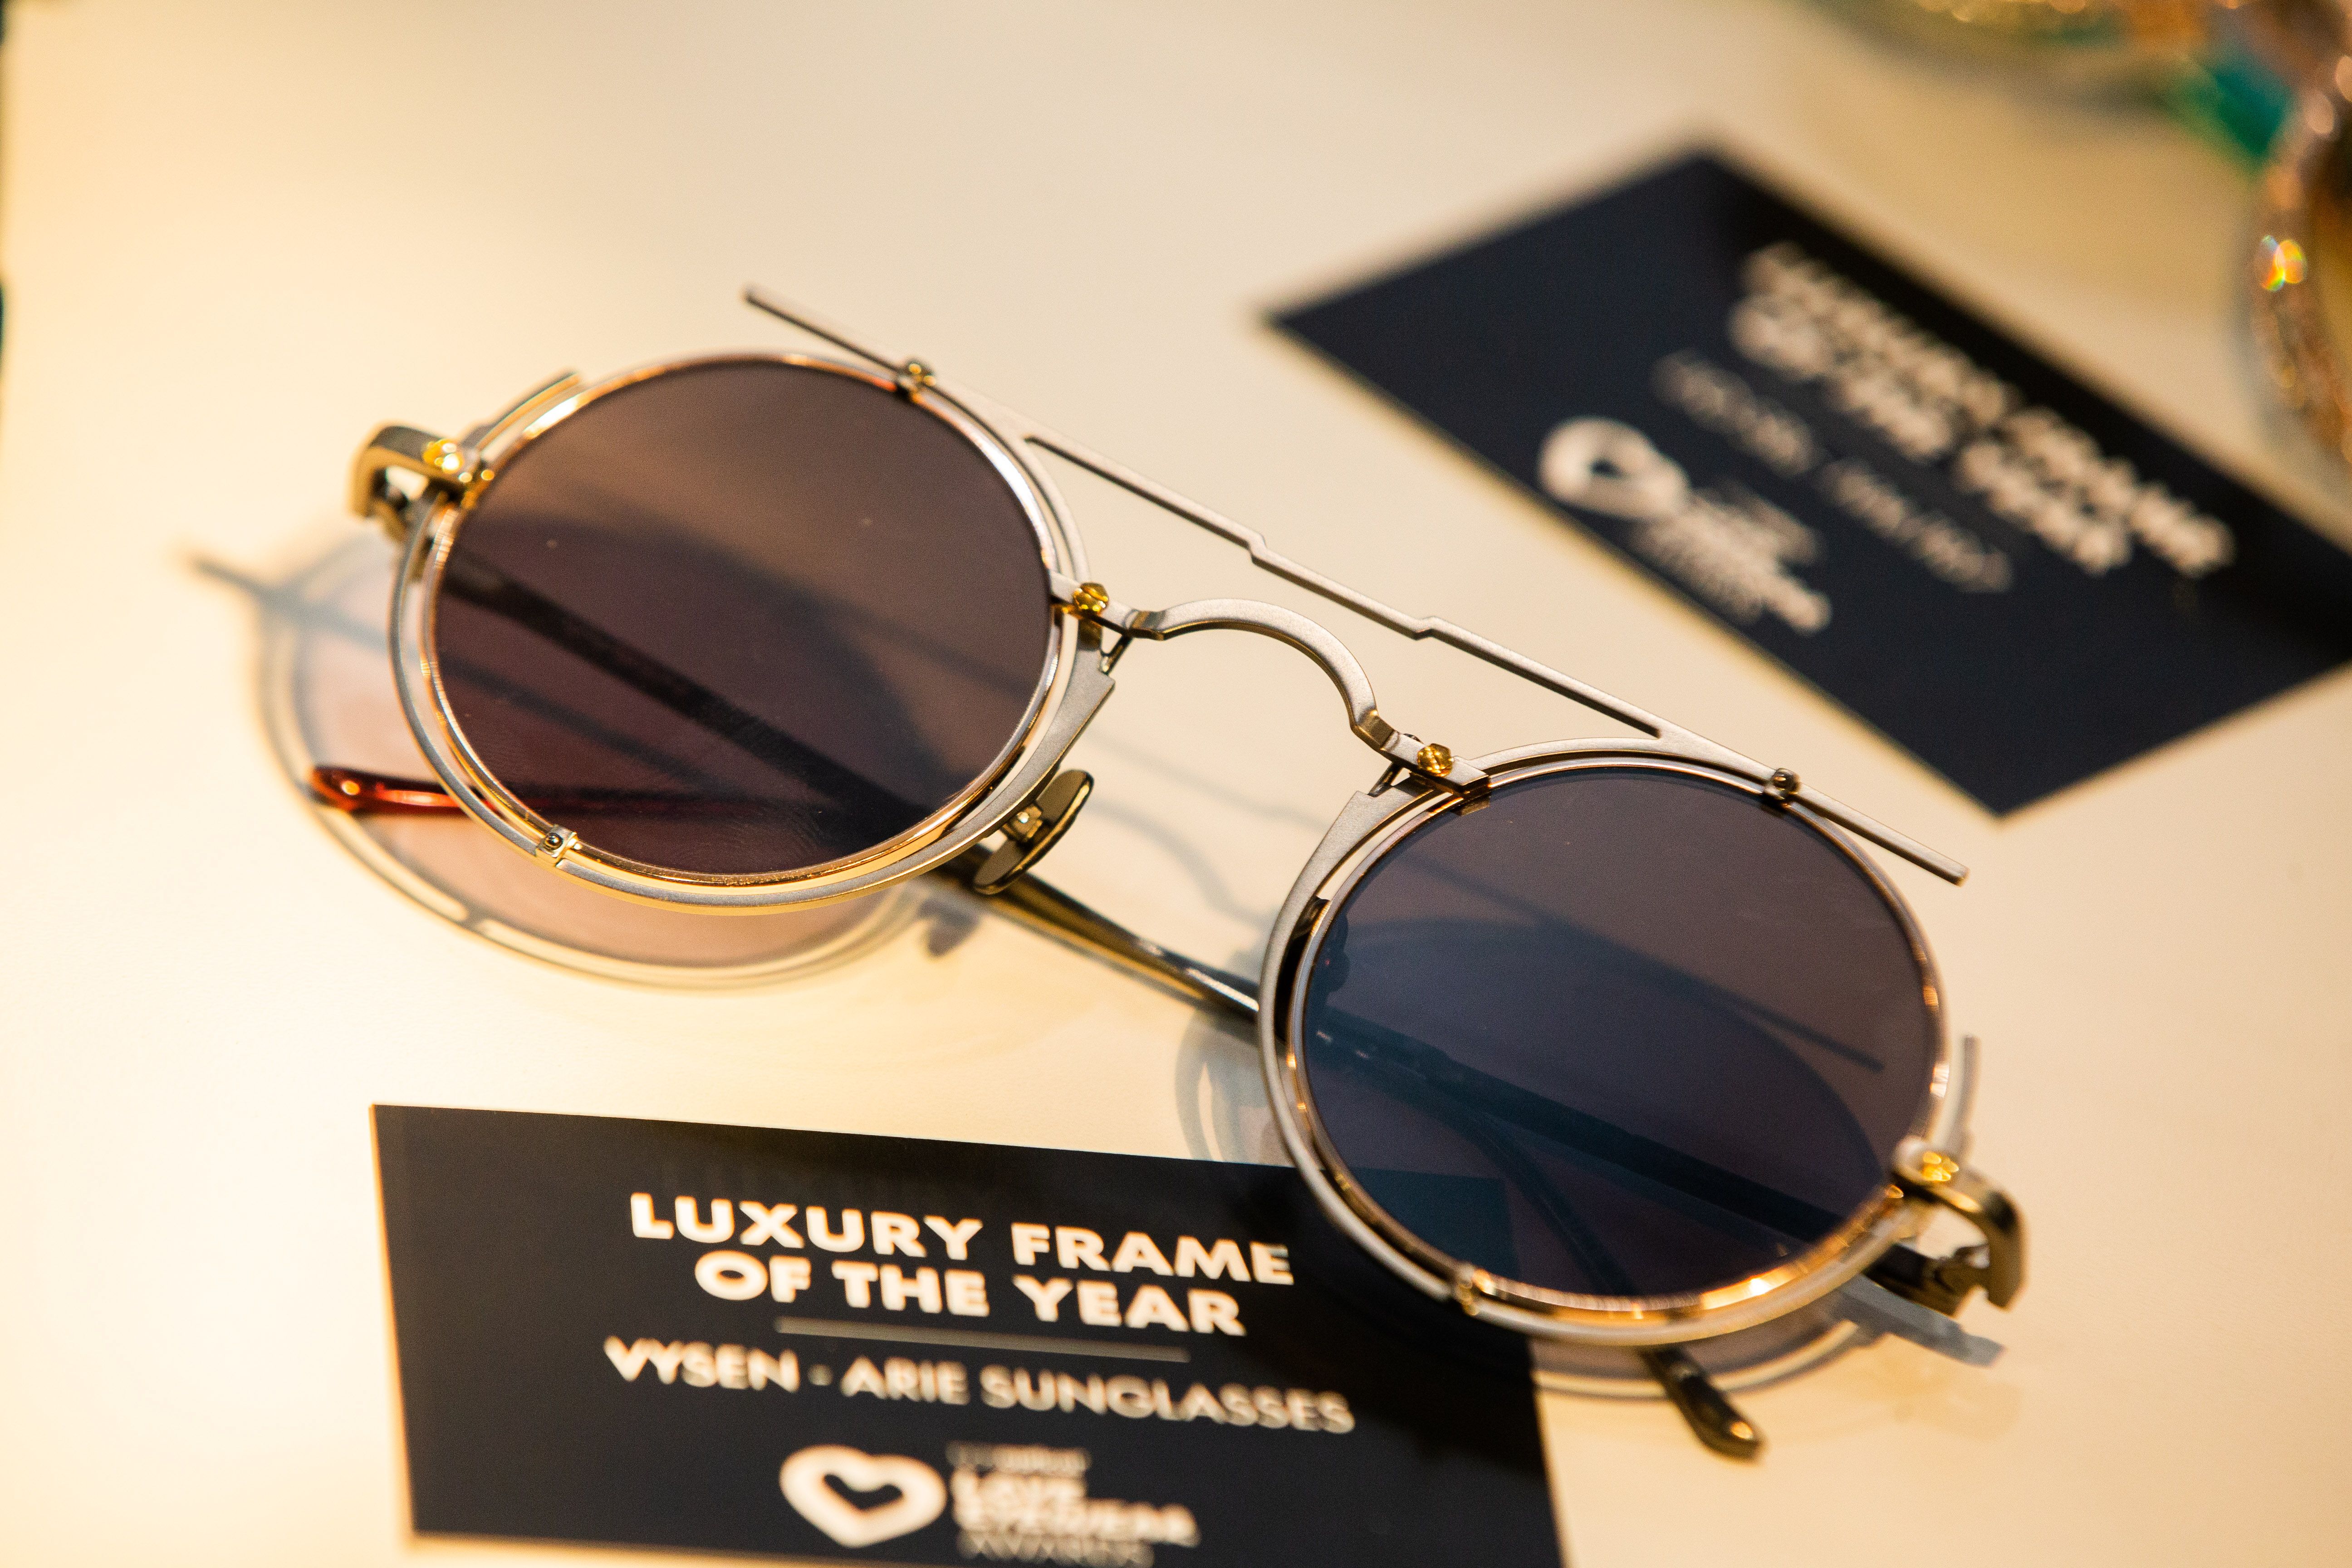 Luxury Frame of the Year